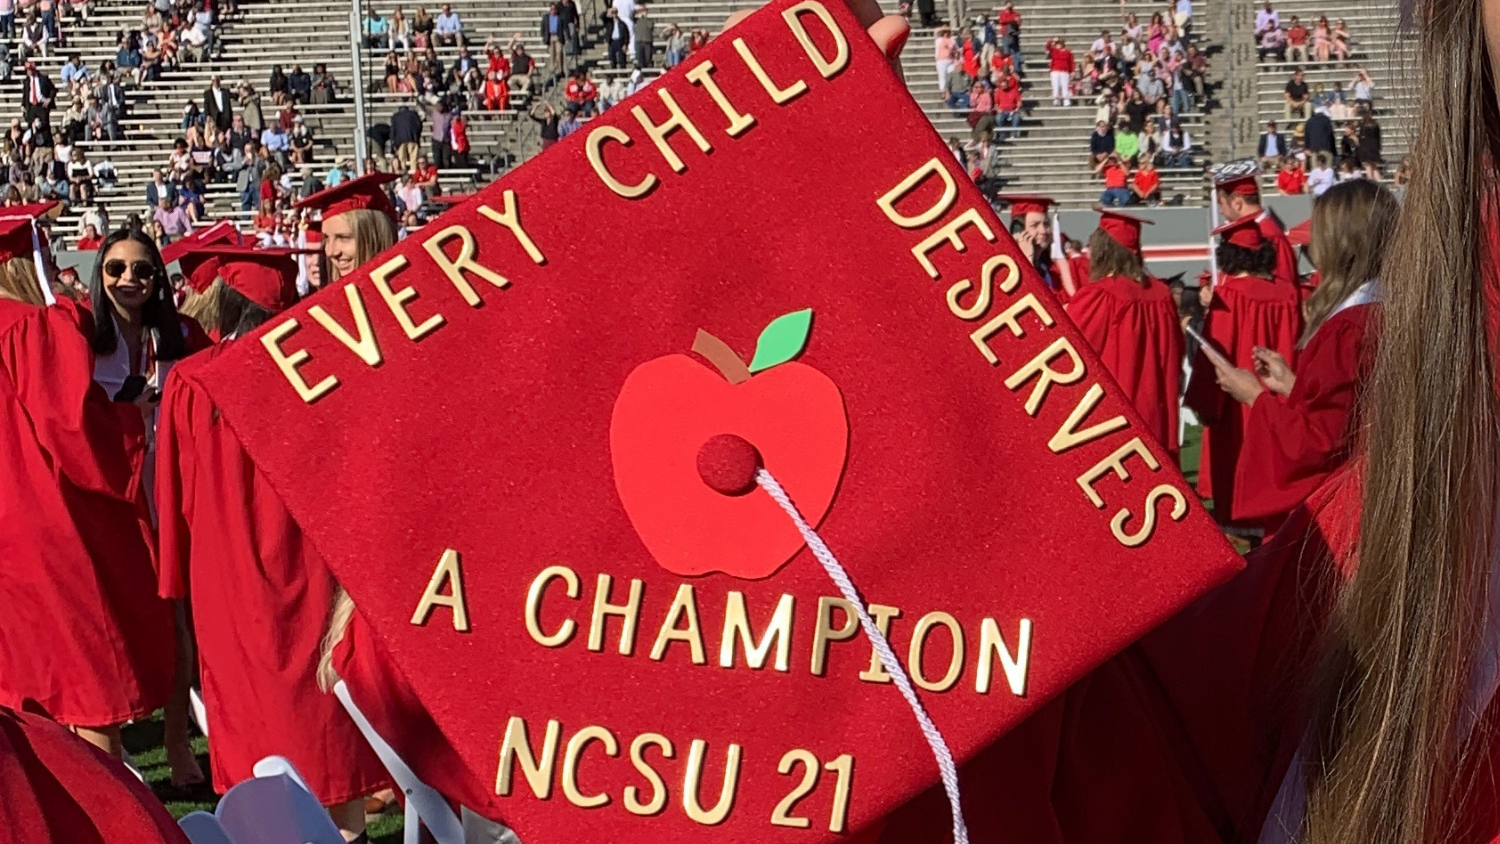 Graduation cap with message that every child deserves a champion